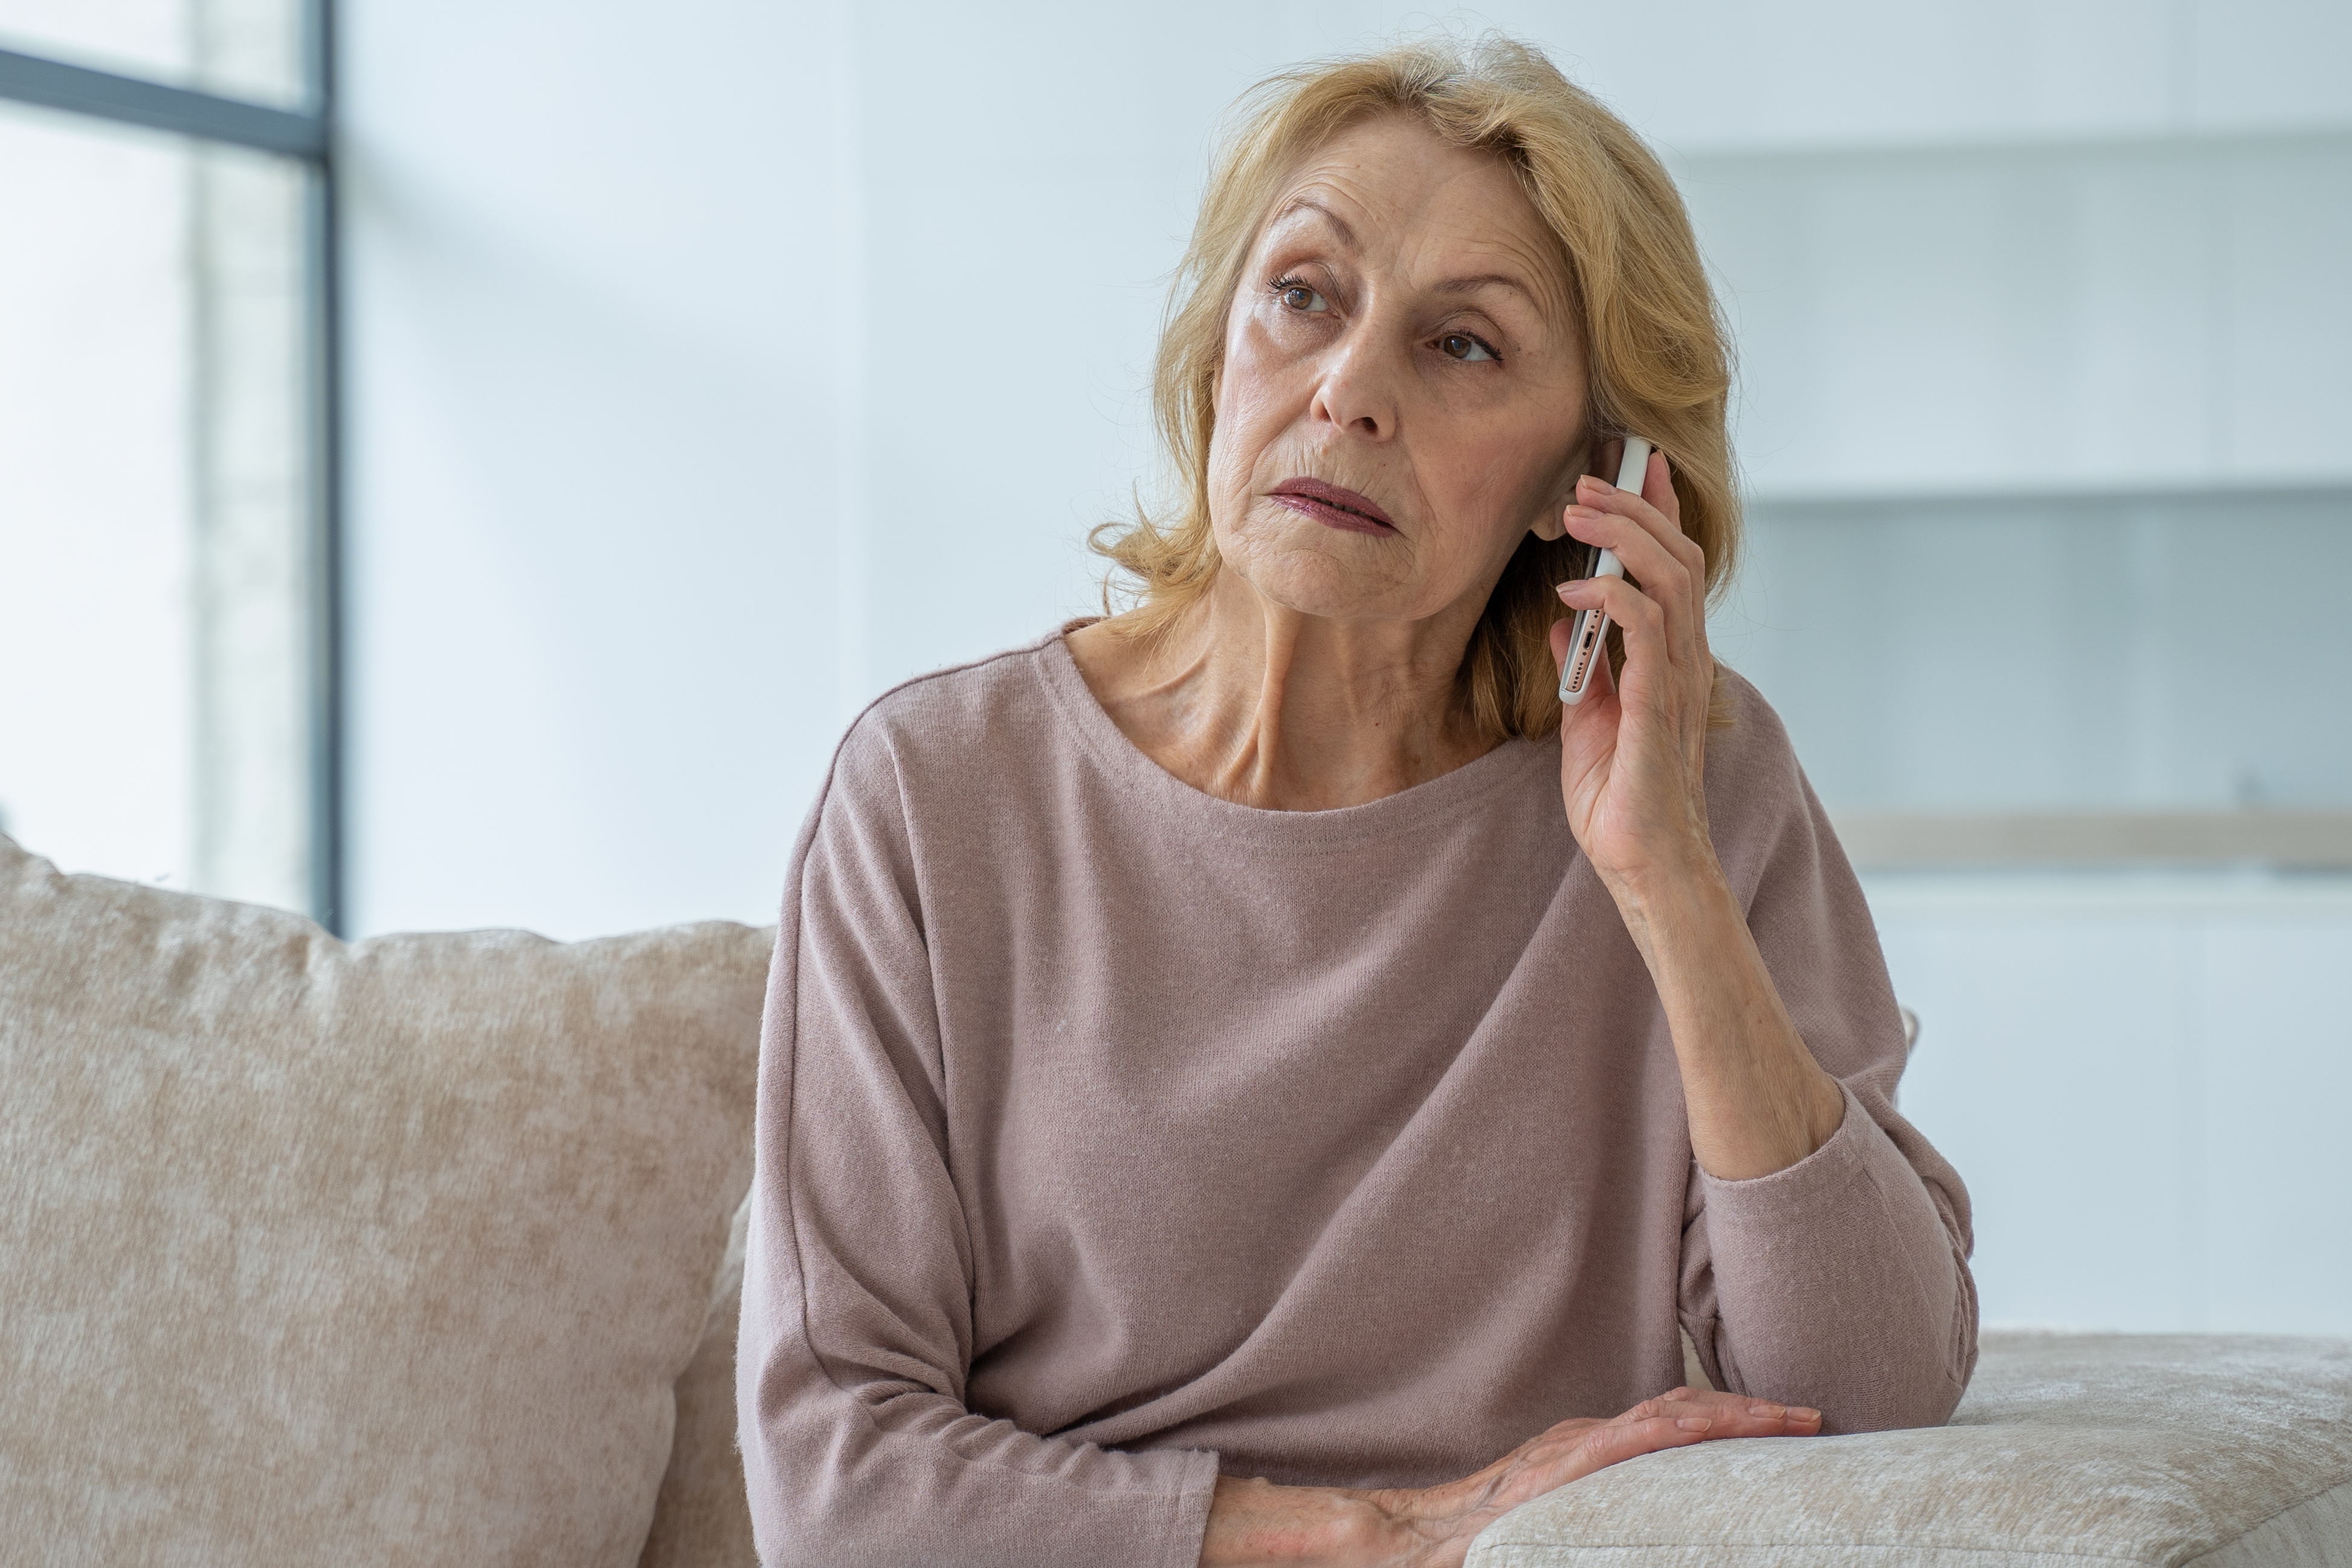 An elderly woman looking sad while on the phone | Source: Shutterstock